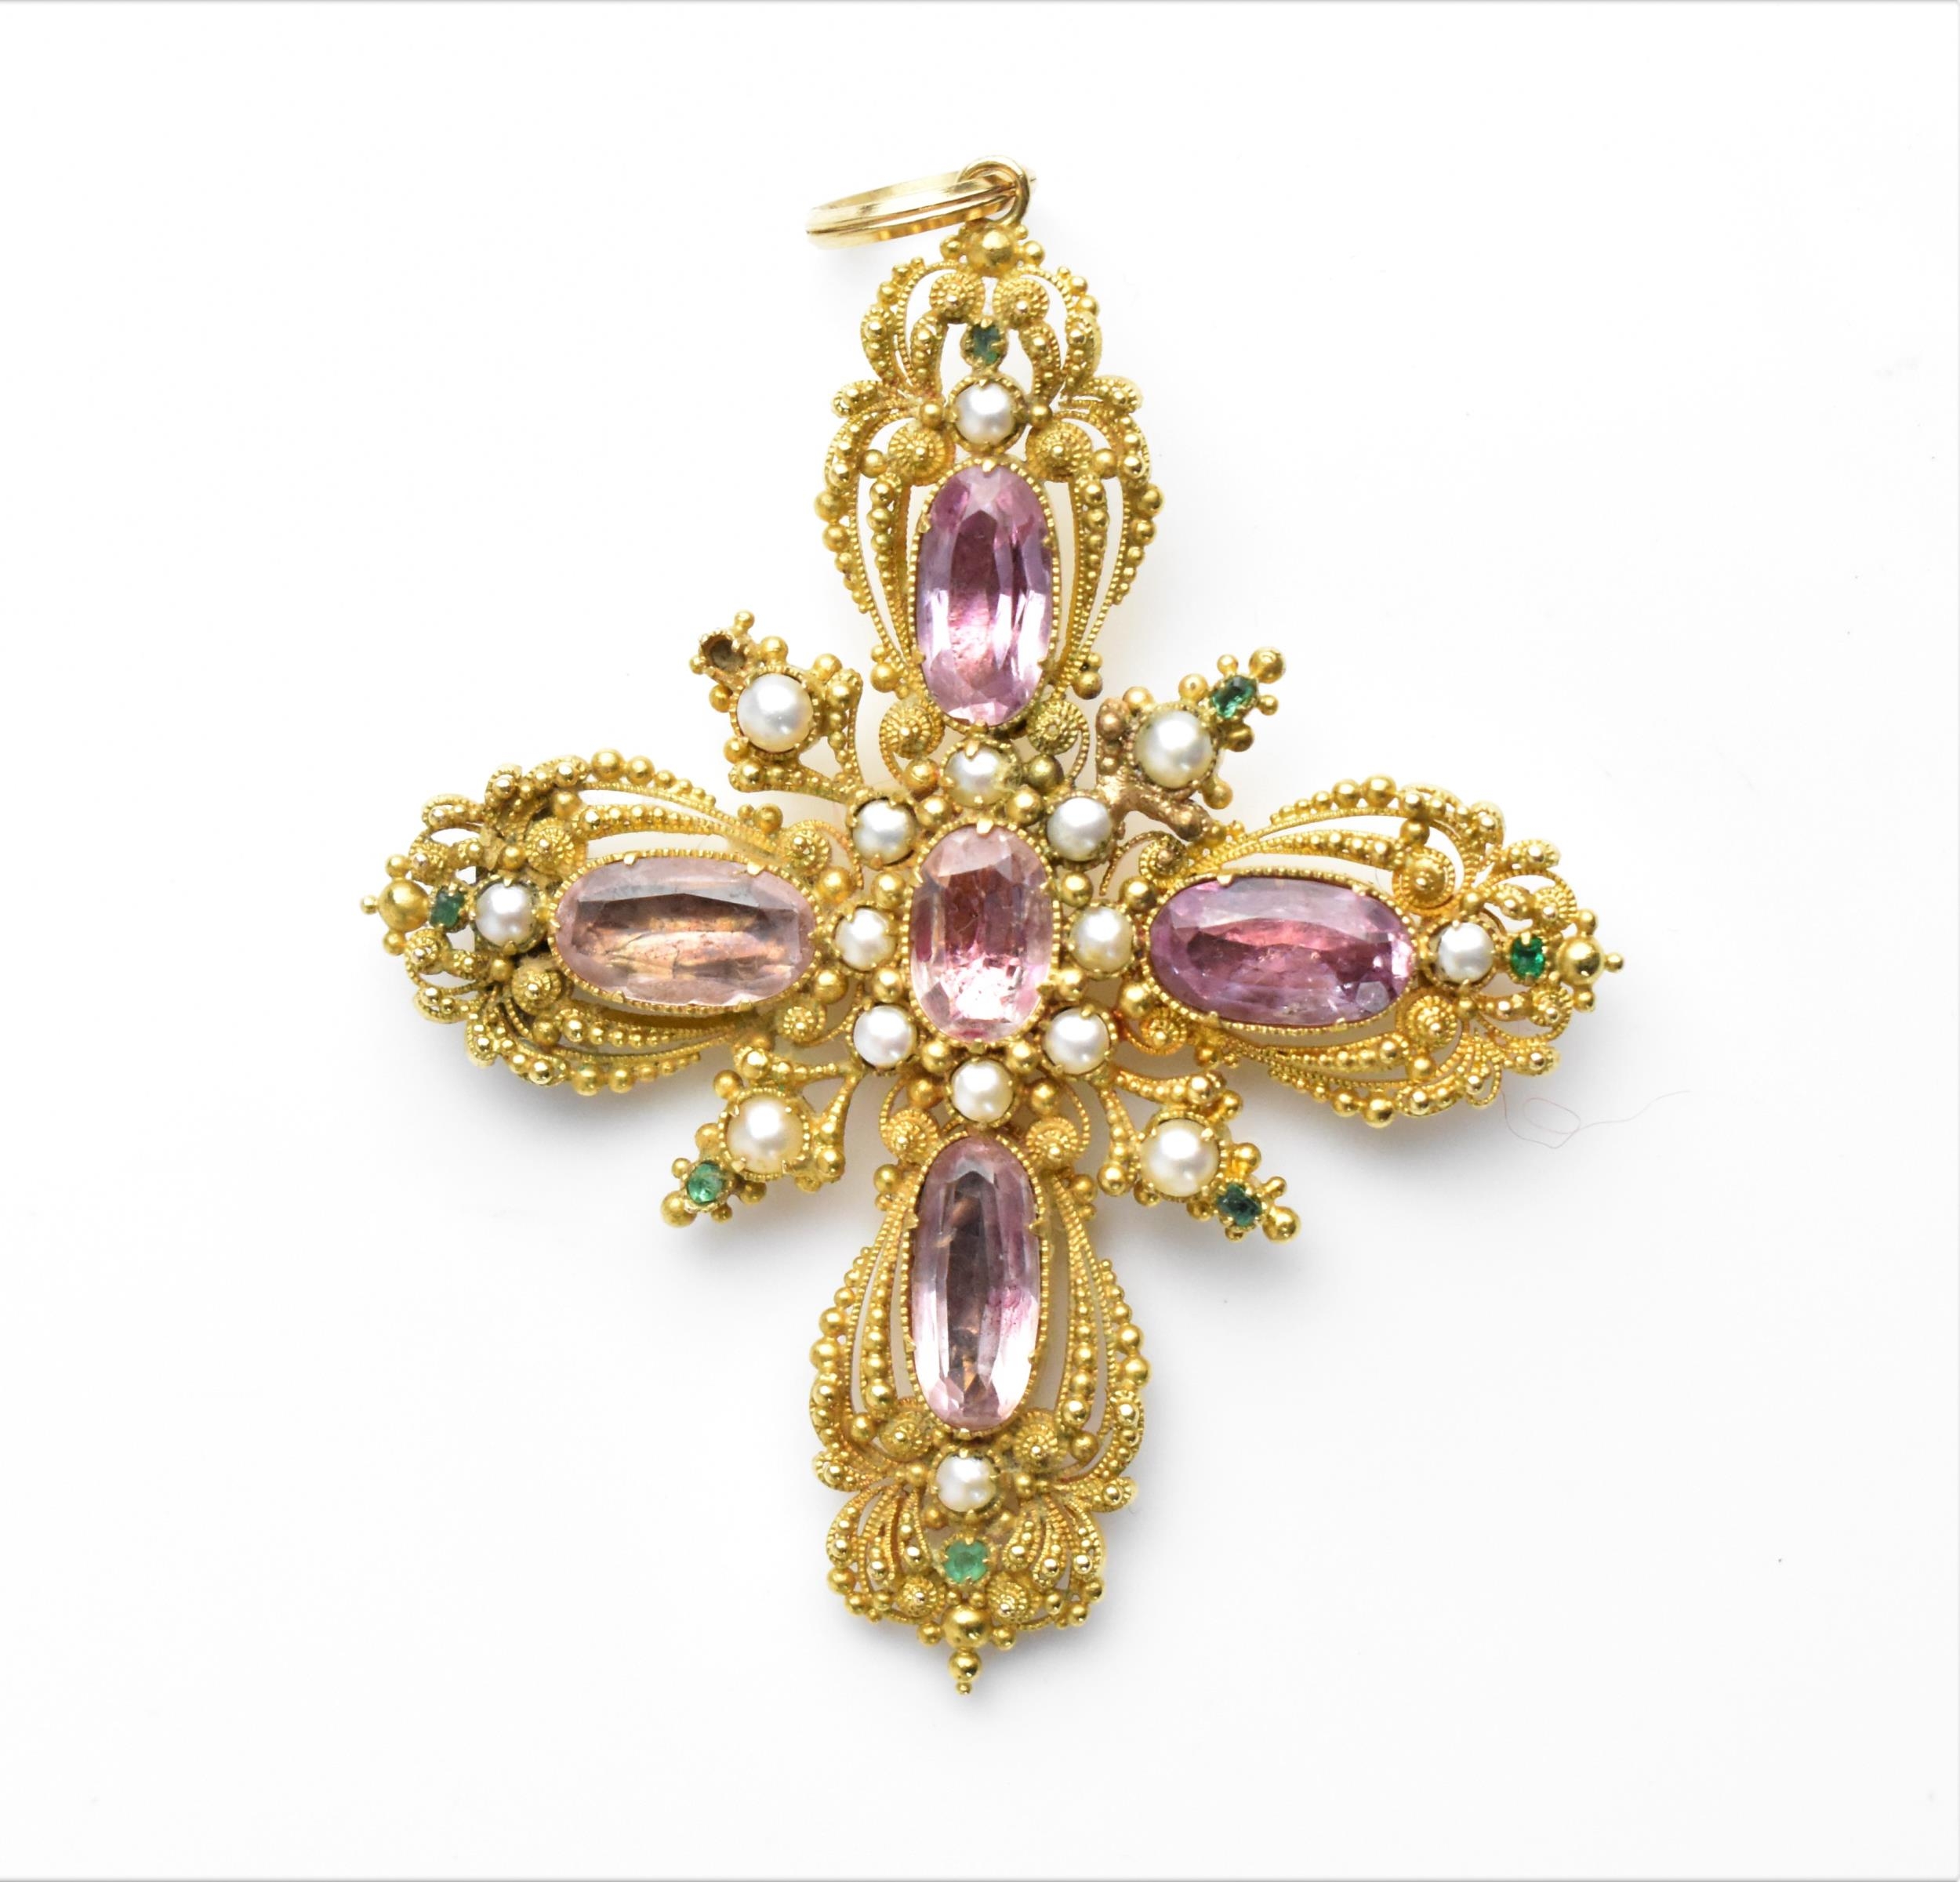 A Georgian pink topaz, pearl and emerald cannetille cross pendant, circa 1820s, with intricate